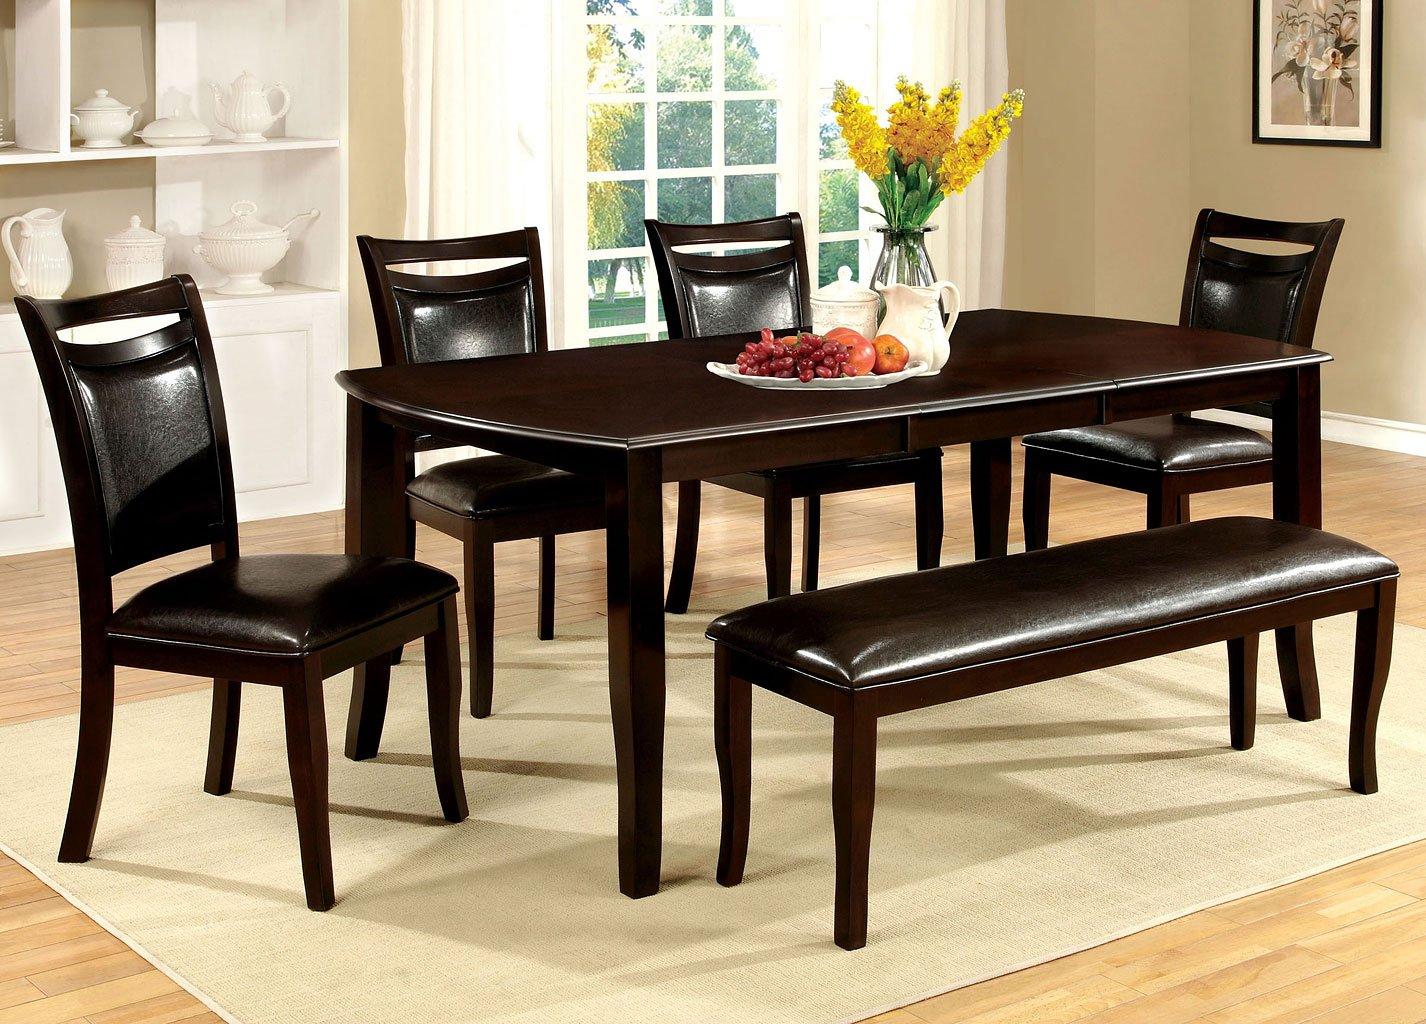 Transitional Dining Table CM3024T Woodside CM3024T in Dark Cherry, Espresso 